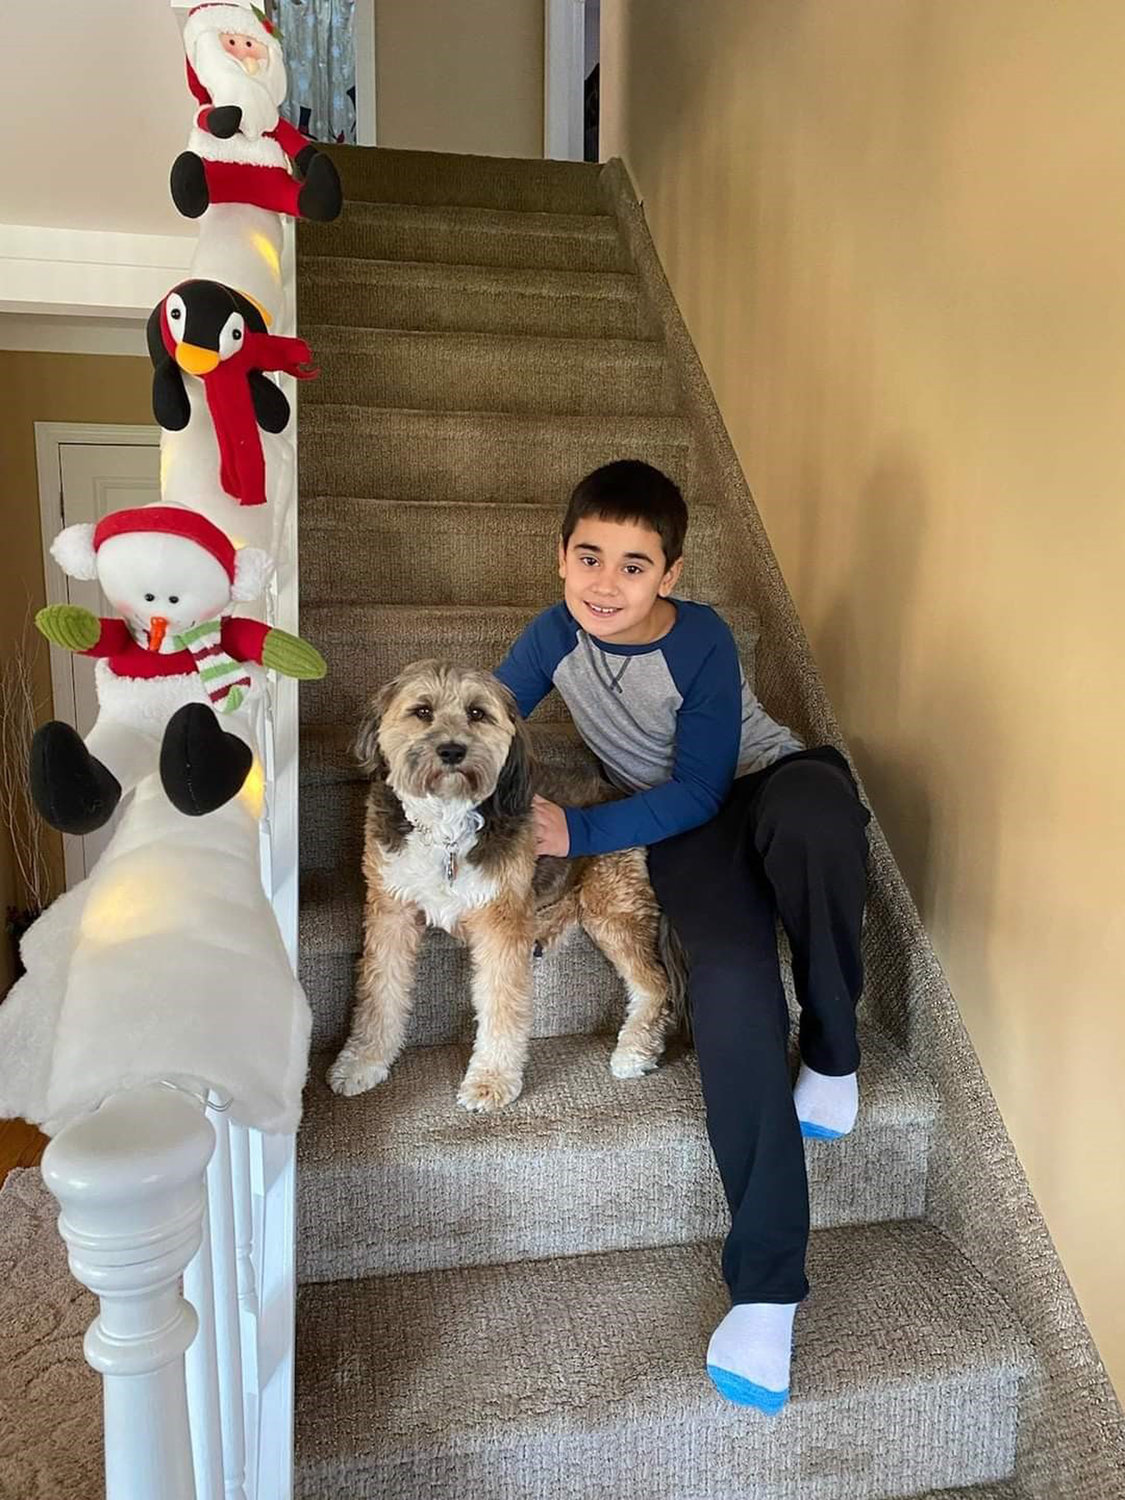 Johnny Ferretti, 8, with his 4-year-old Tibetan terrier, Benny, the inspiration for the legislation after he was attacked by a neighbor’s dog.